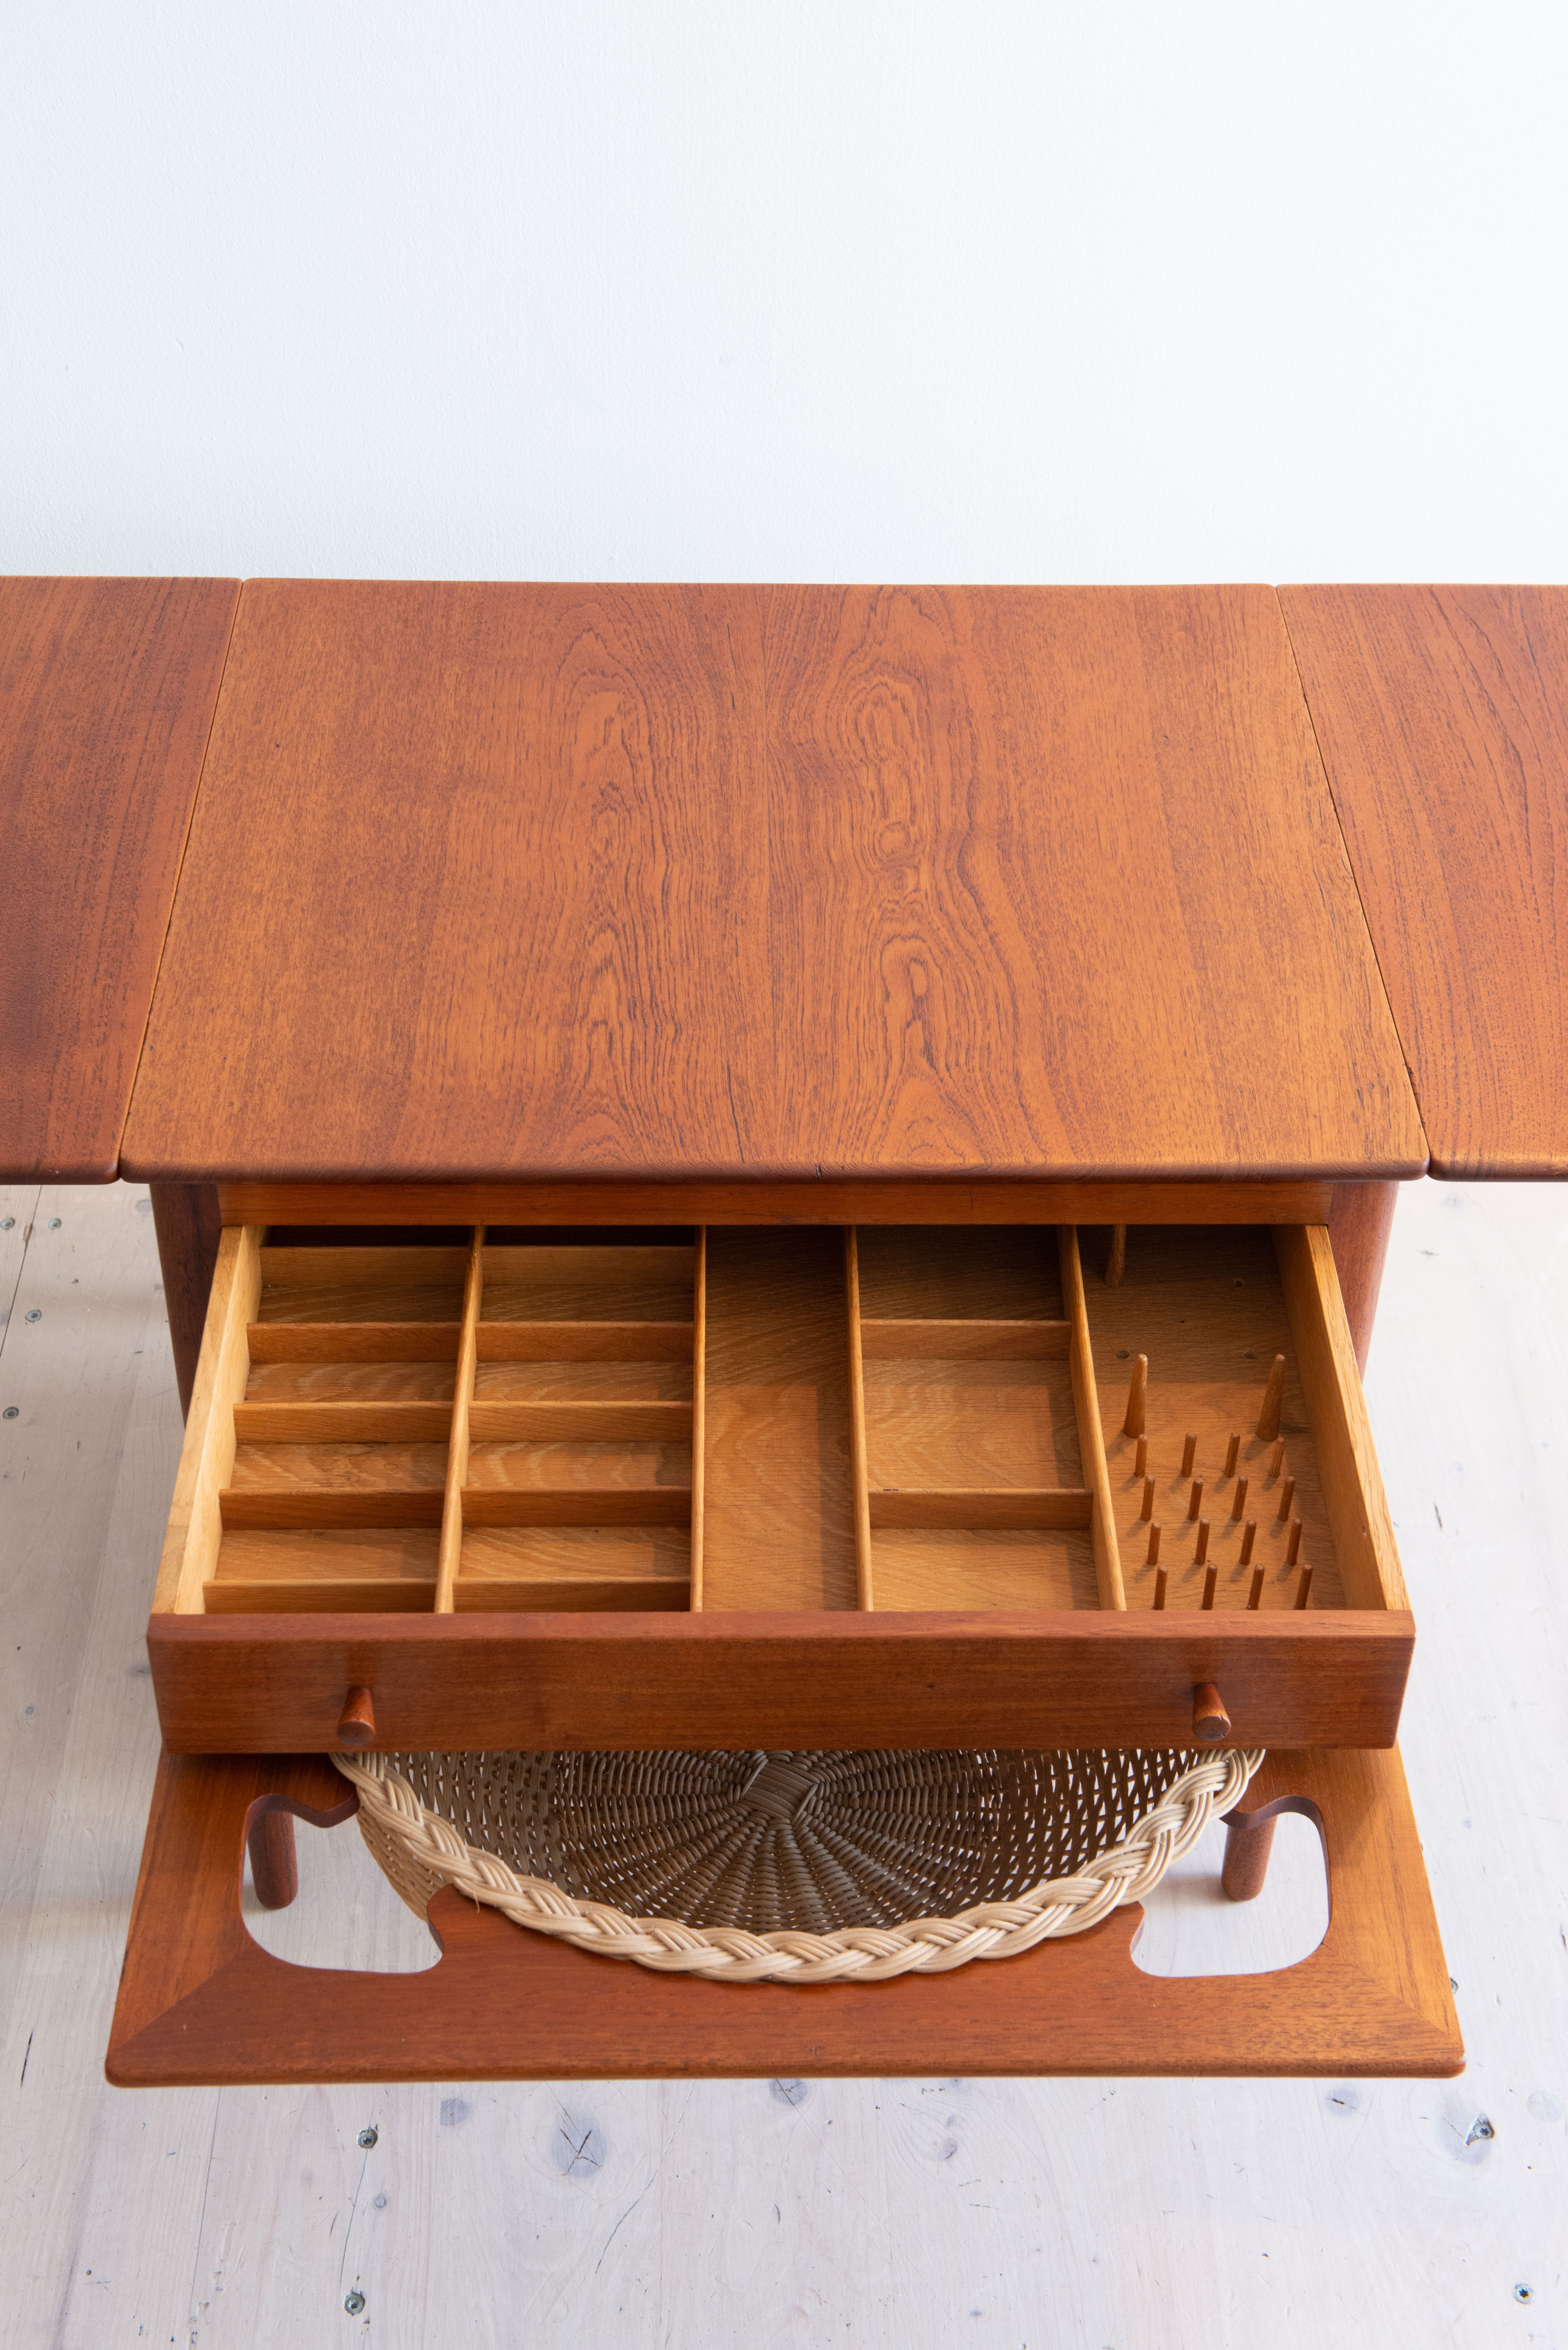 AT33 Teak Sewing Table by Hans J. Wegner. Made by Andreas Tuck. Made in Denmark, 1950s. Available at heyday möbel, Grubenstrasse 14, 8045 Zürich, Switzerland.